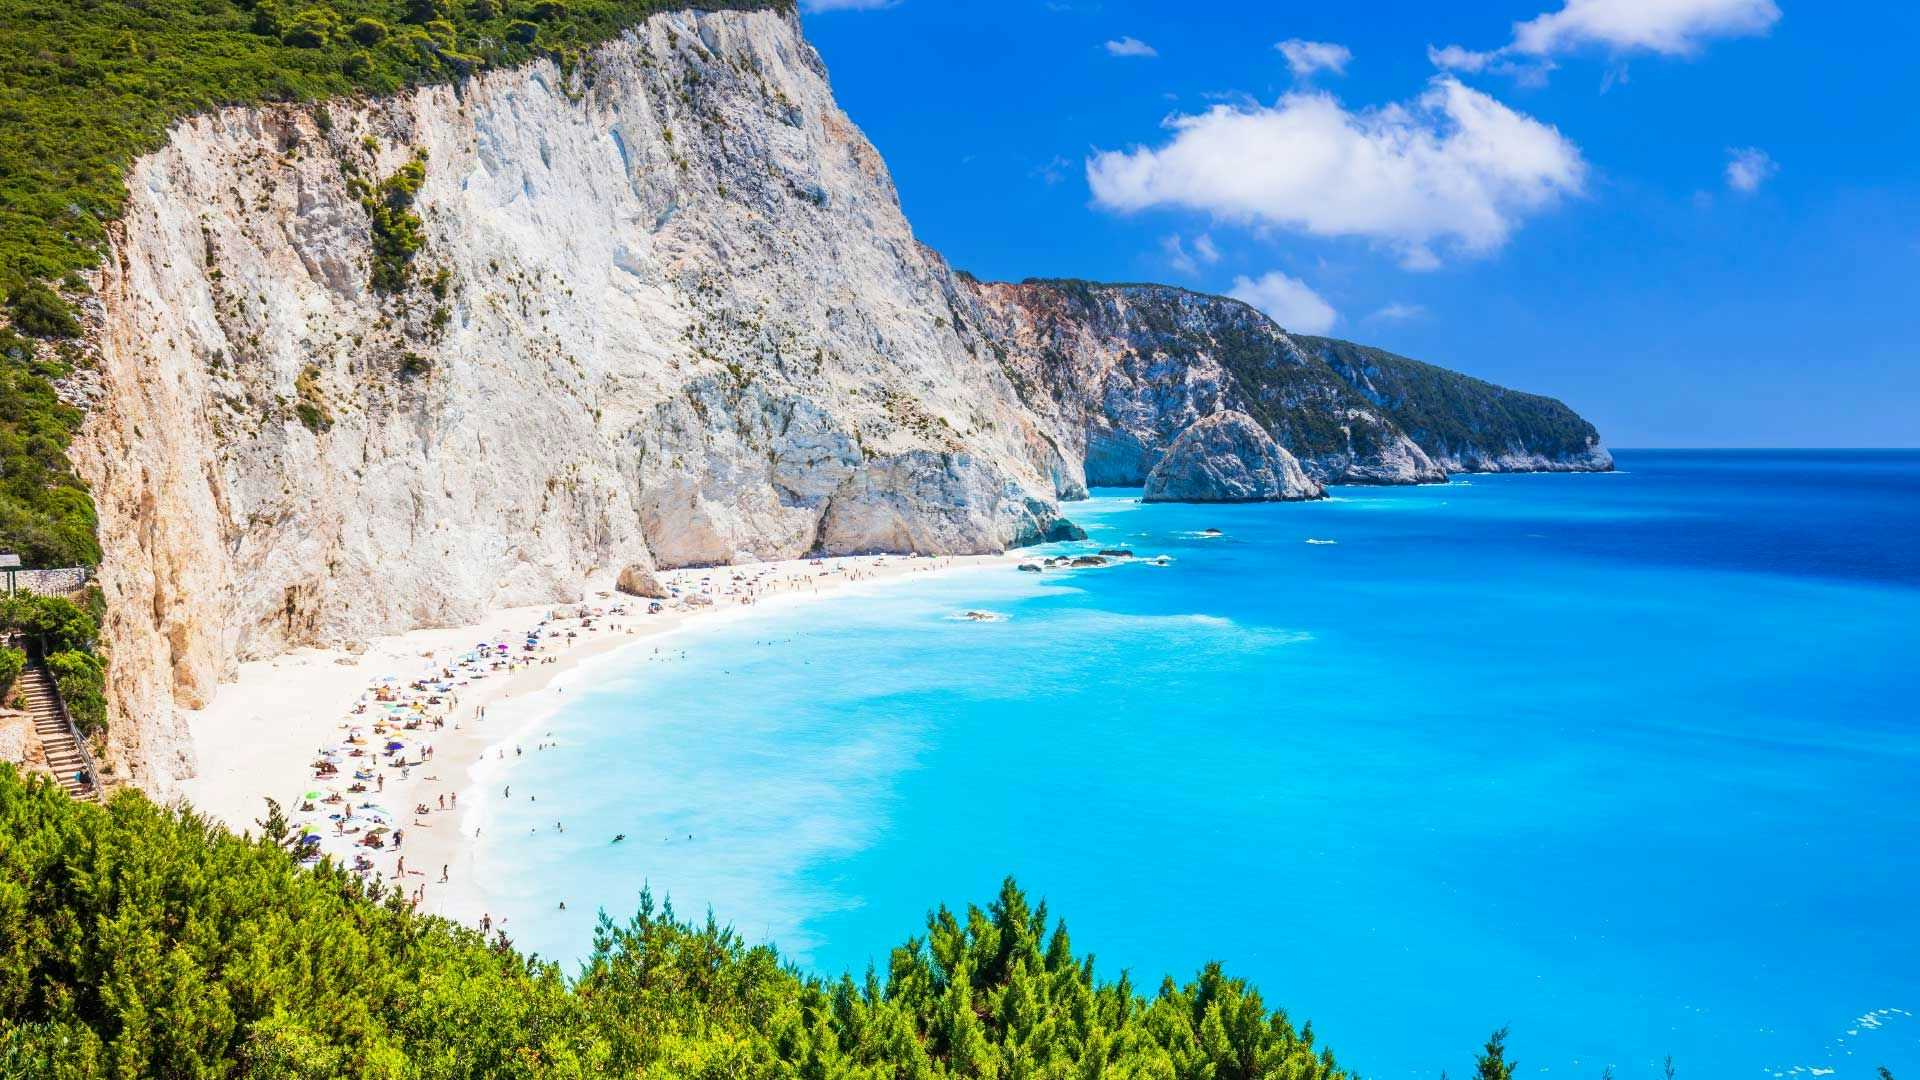 View of stunning blue water at beach in Lefkada Greece